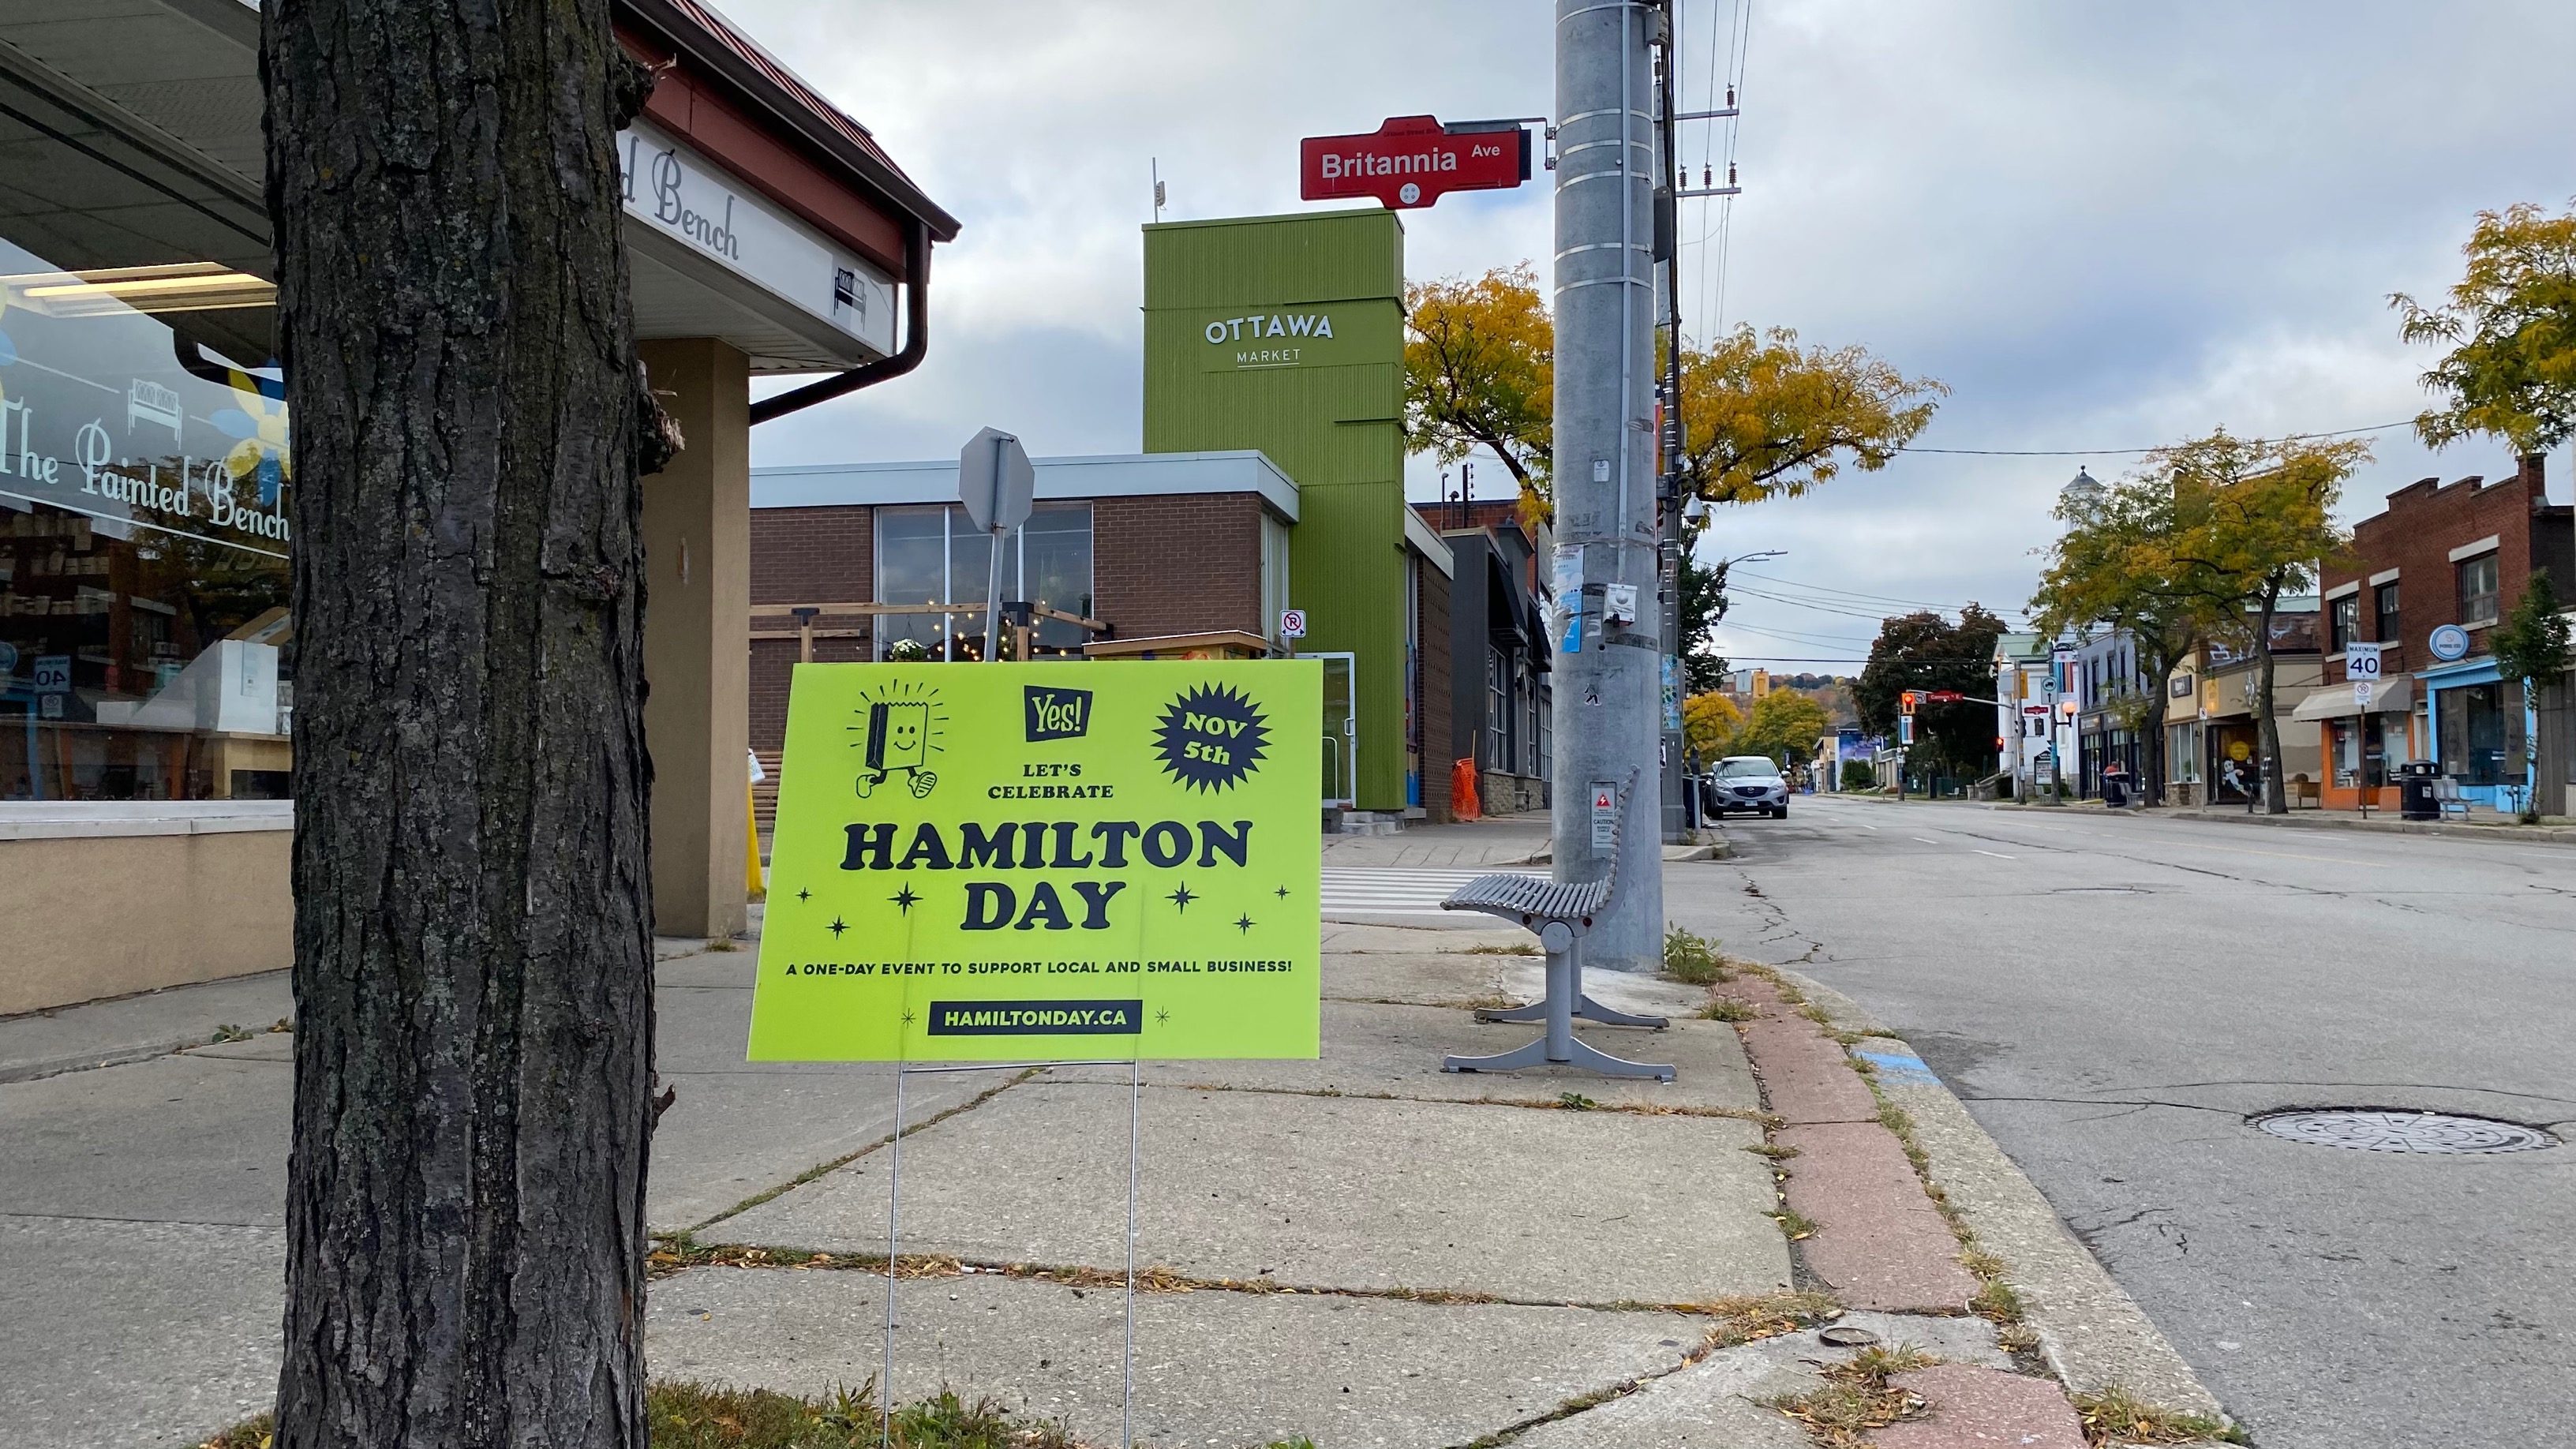 Hamilton Day now a four-night affair rallying around local and small businesses